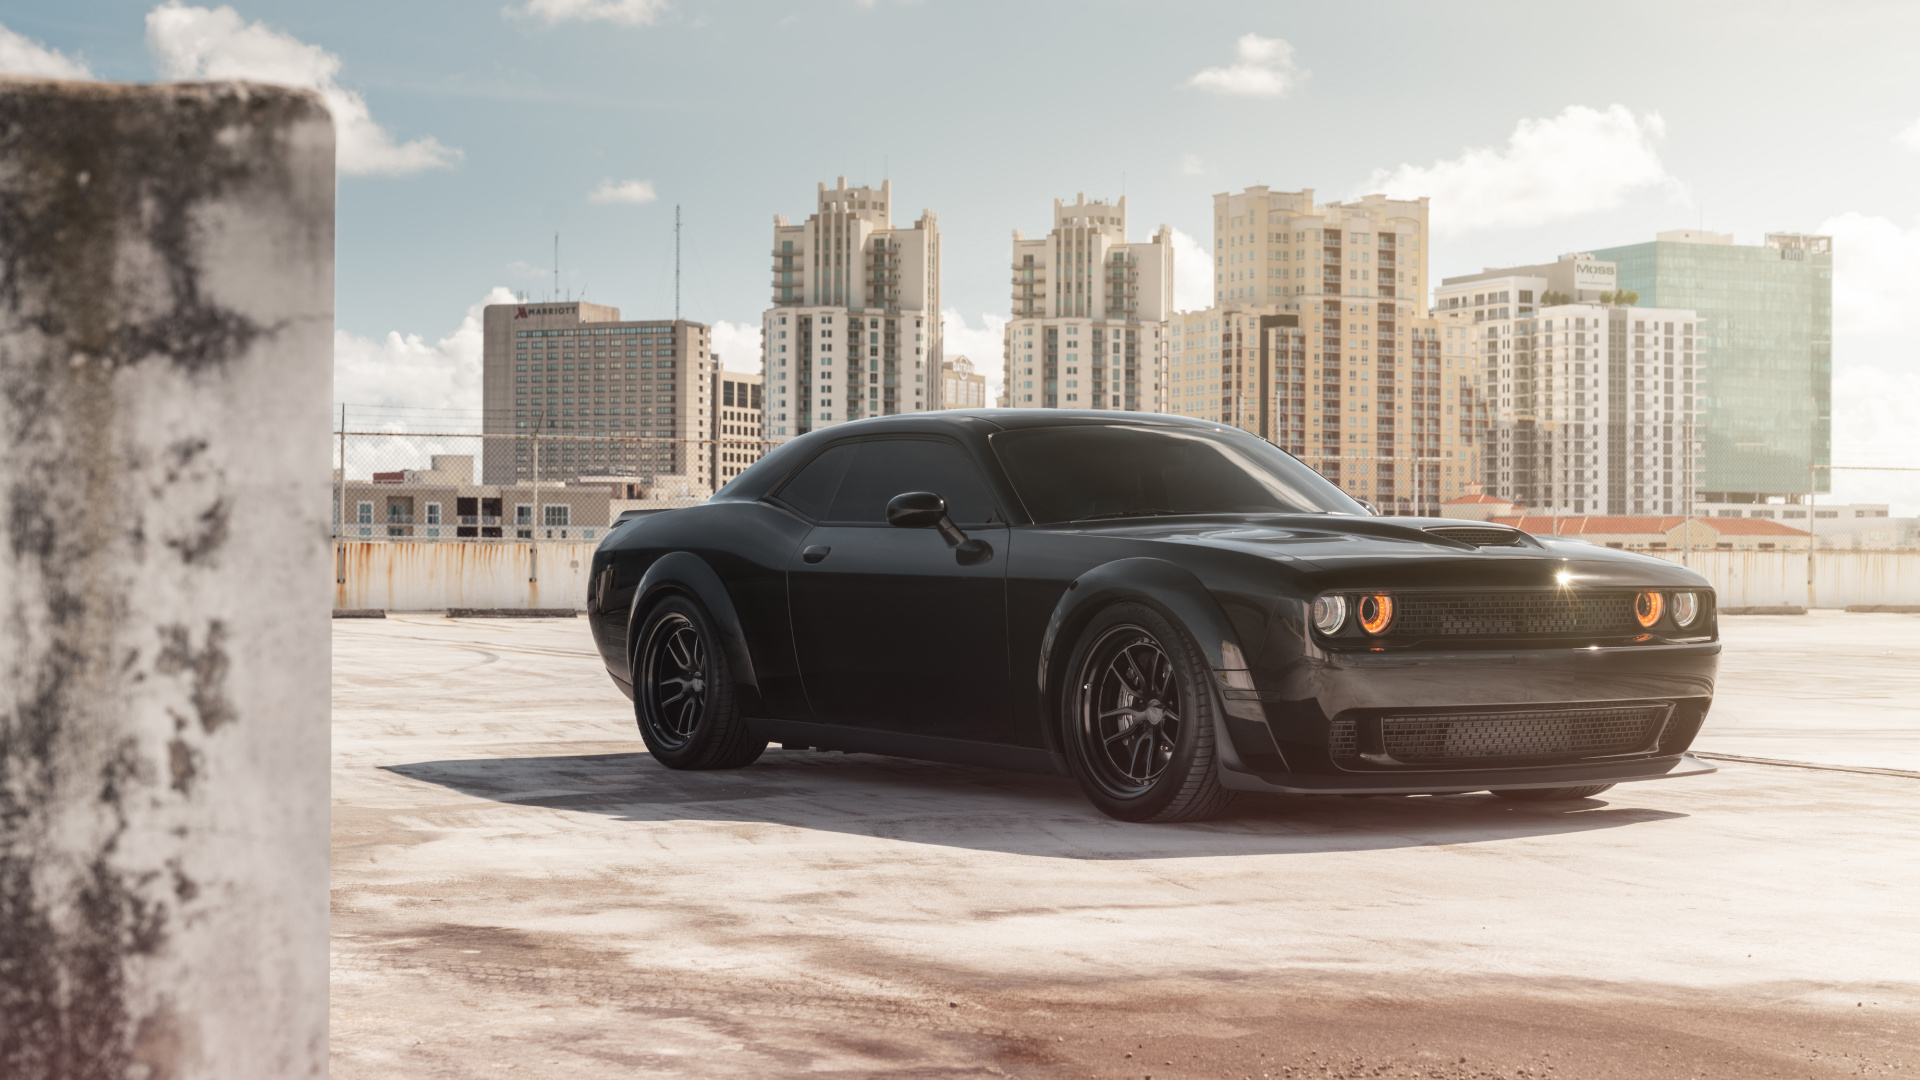 Black Coupe Parked on Gray Concrete Pavement During Daytime. Wallpaper in 1920x1080 Resolution